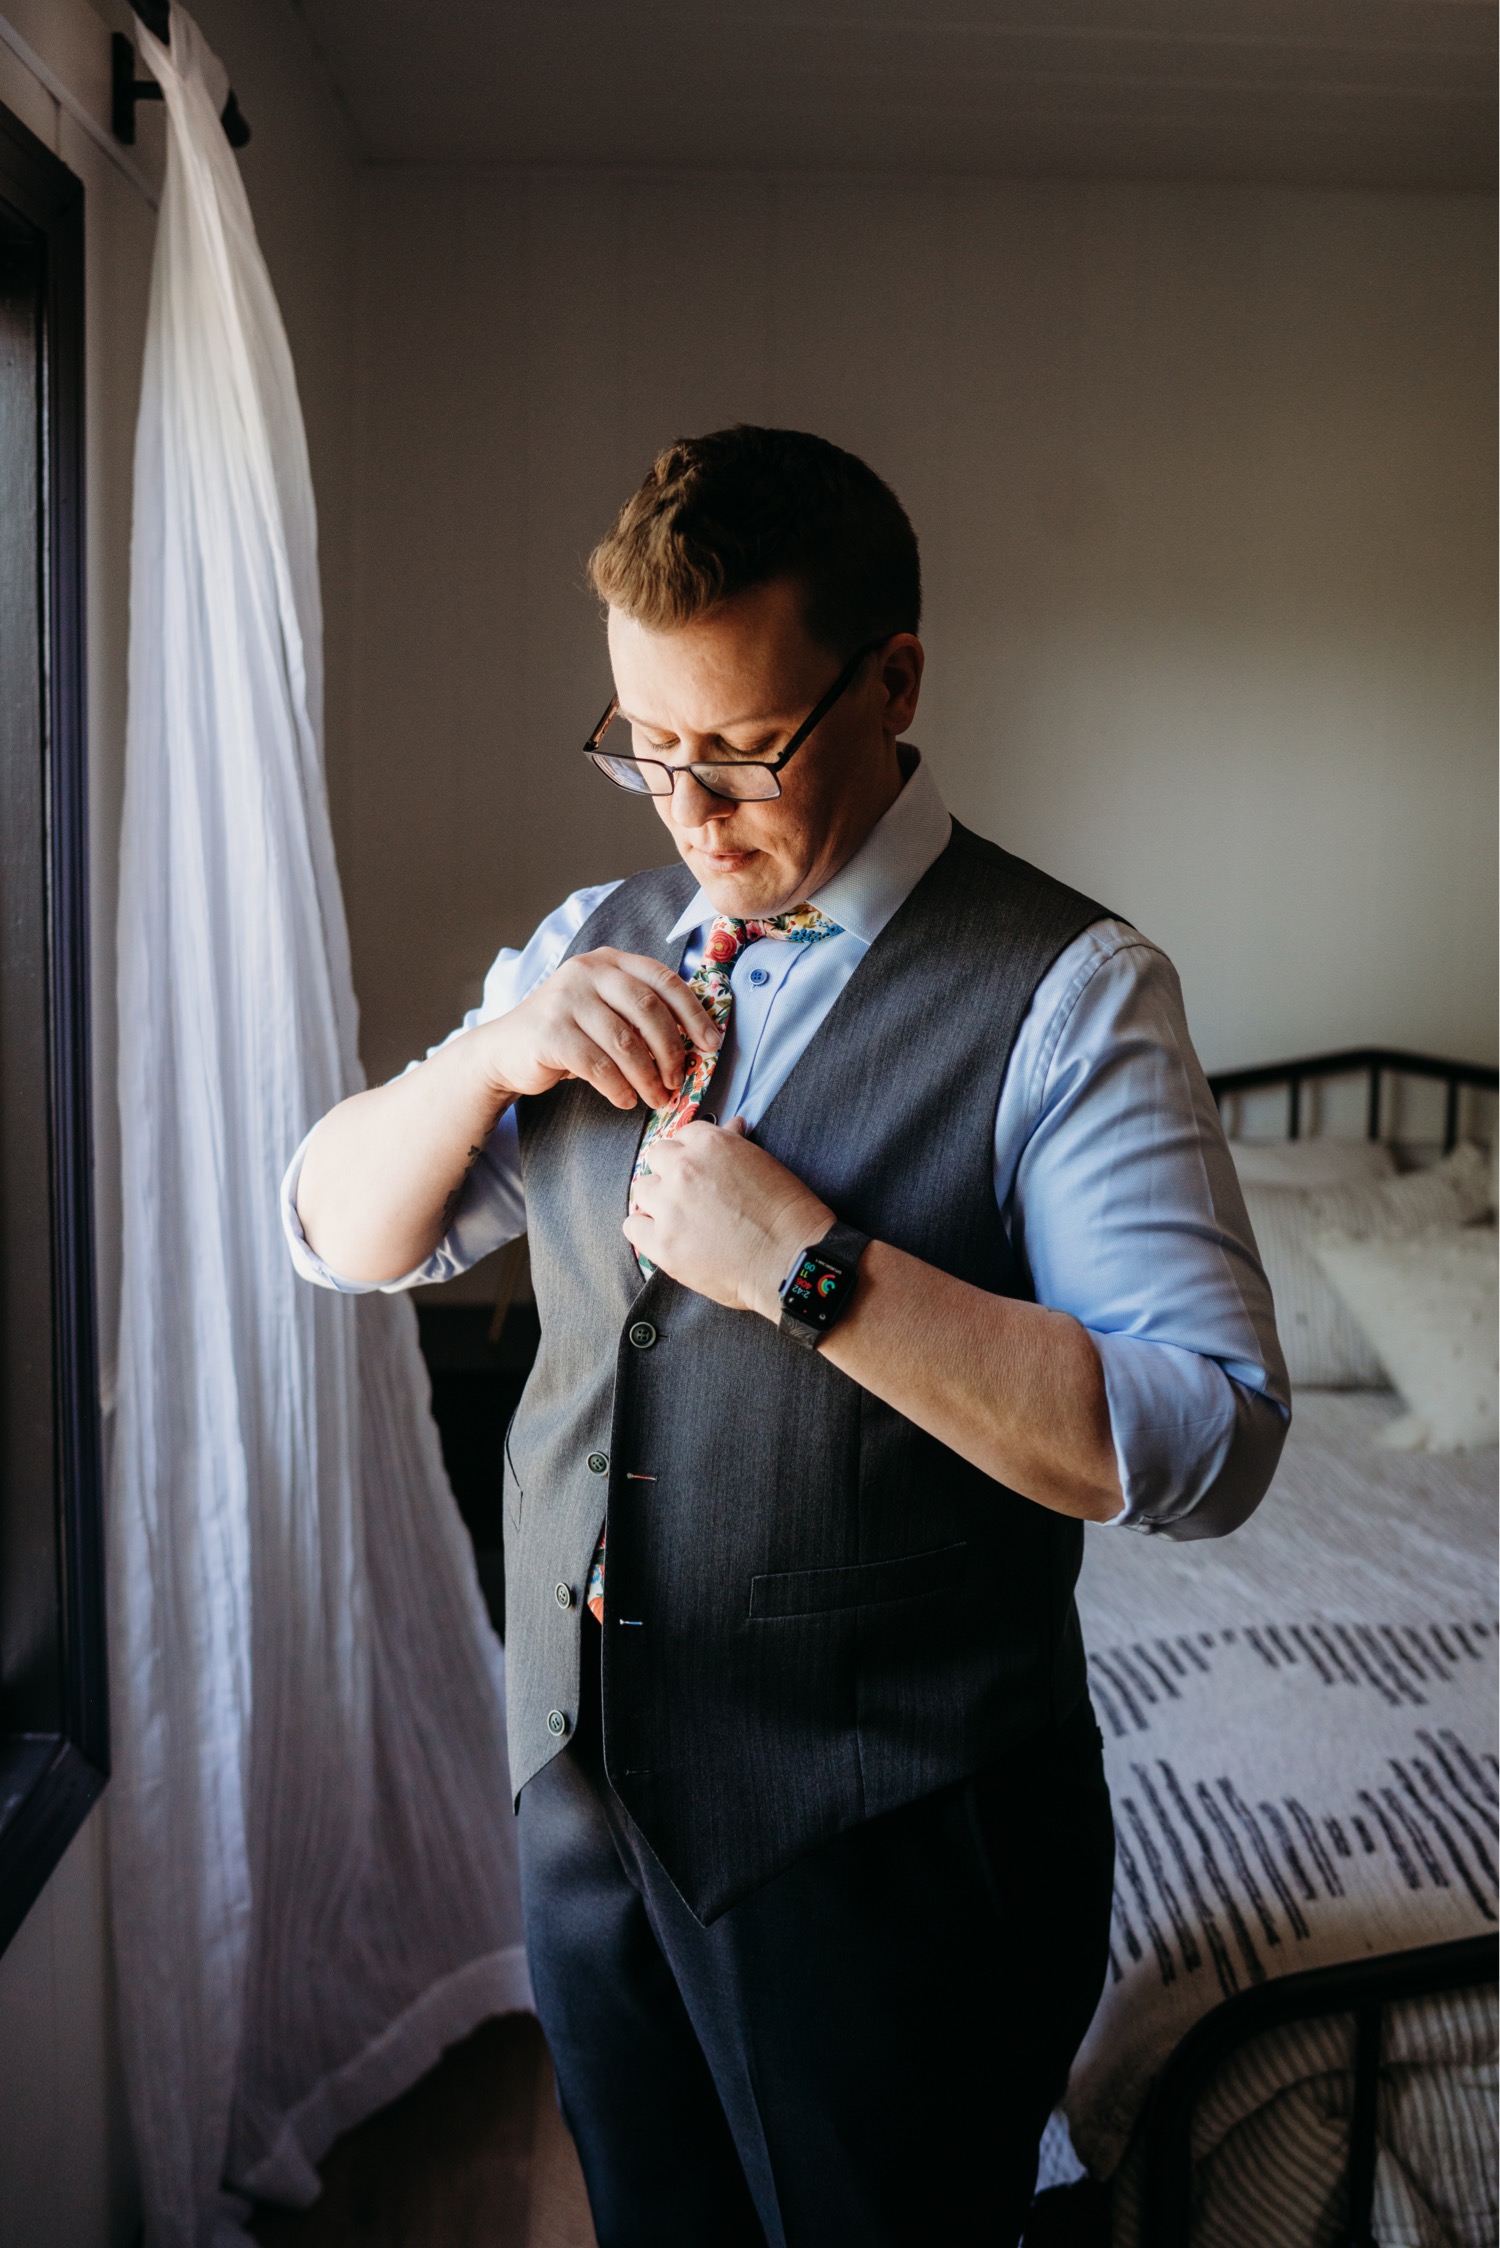 Bride getting dressed in her suit with a floral tie. Liz Koston Photography.